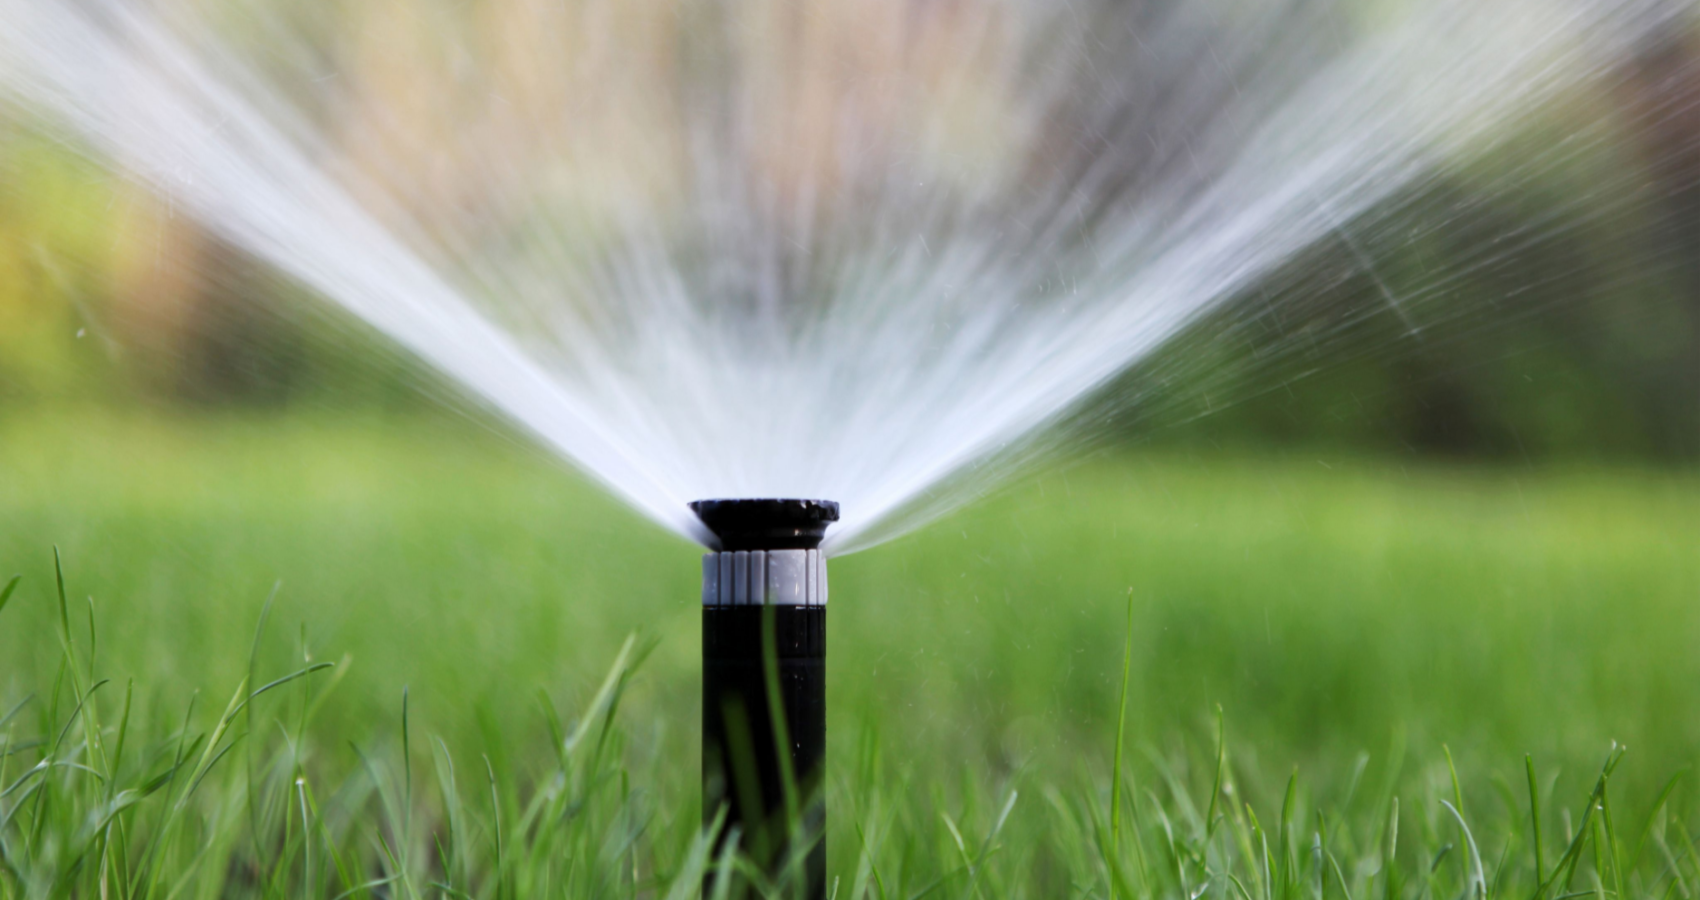 Sprinkler System Installation Chesterfield, MO | Lawn Care for Chesterfield, MO Area | Lawn Sprinklers of St. Louis